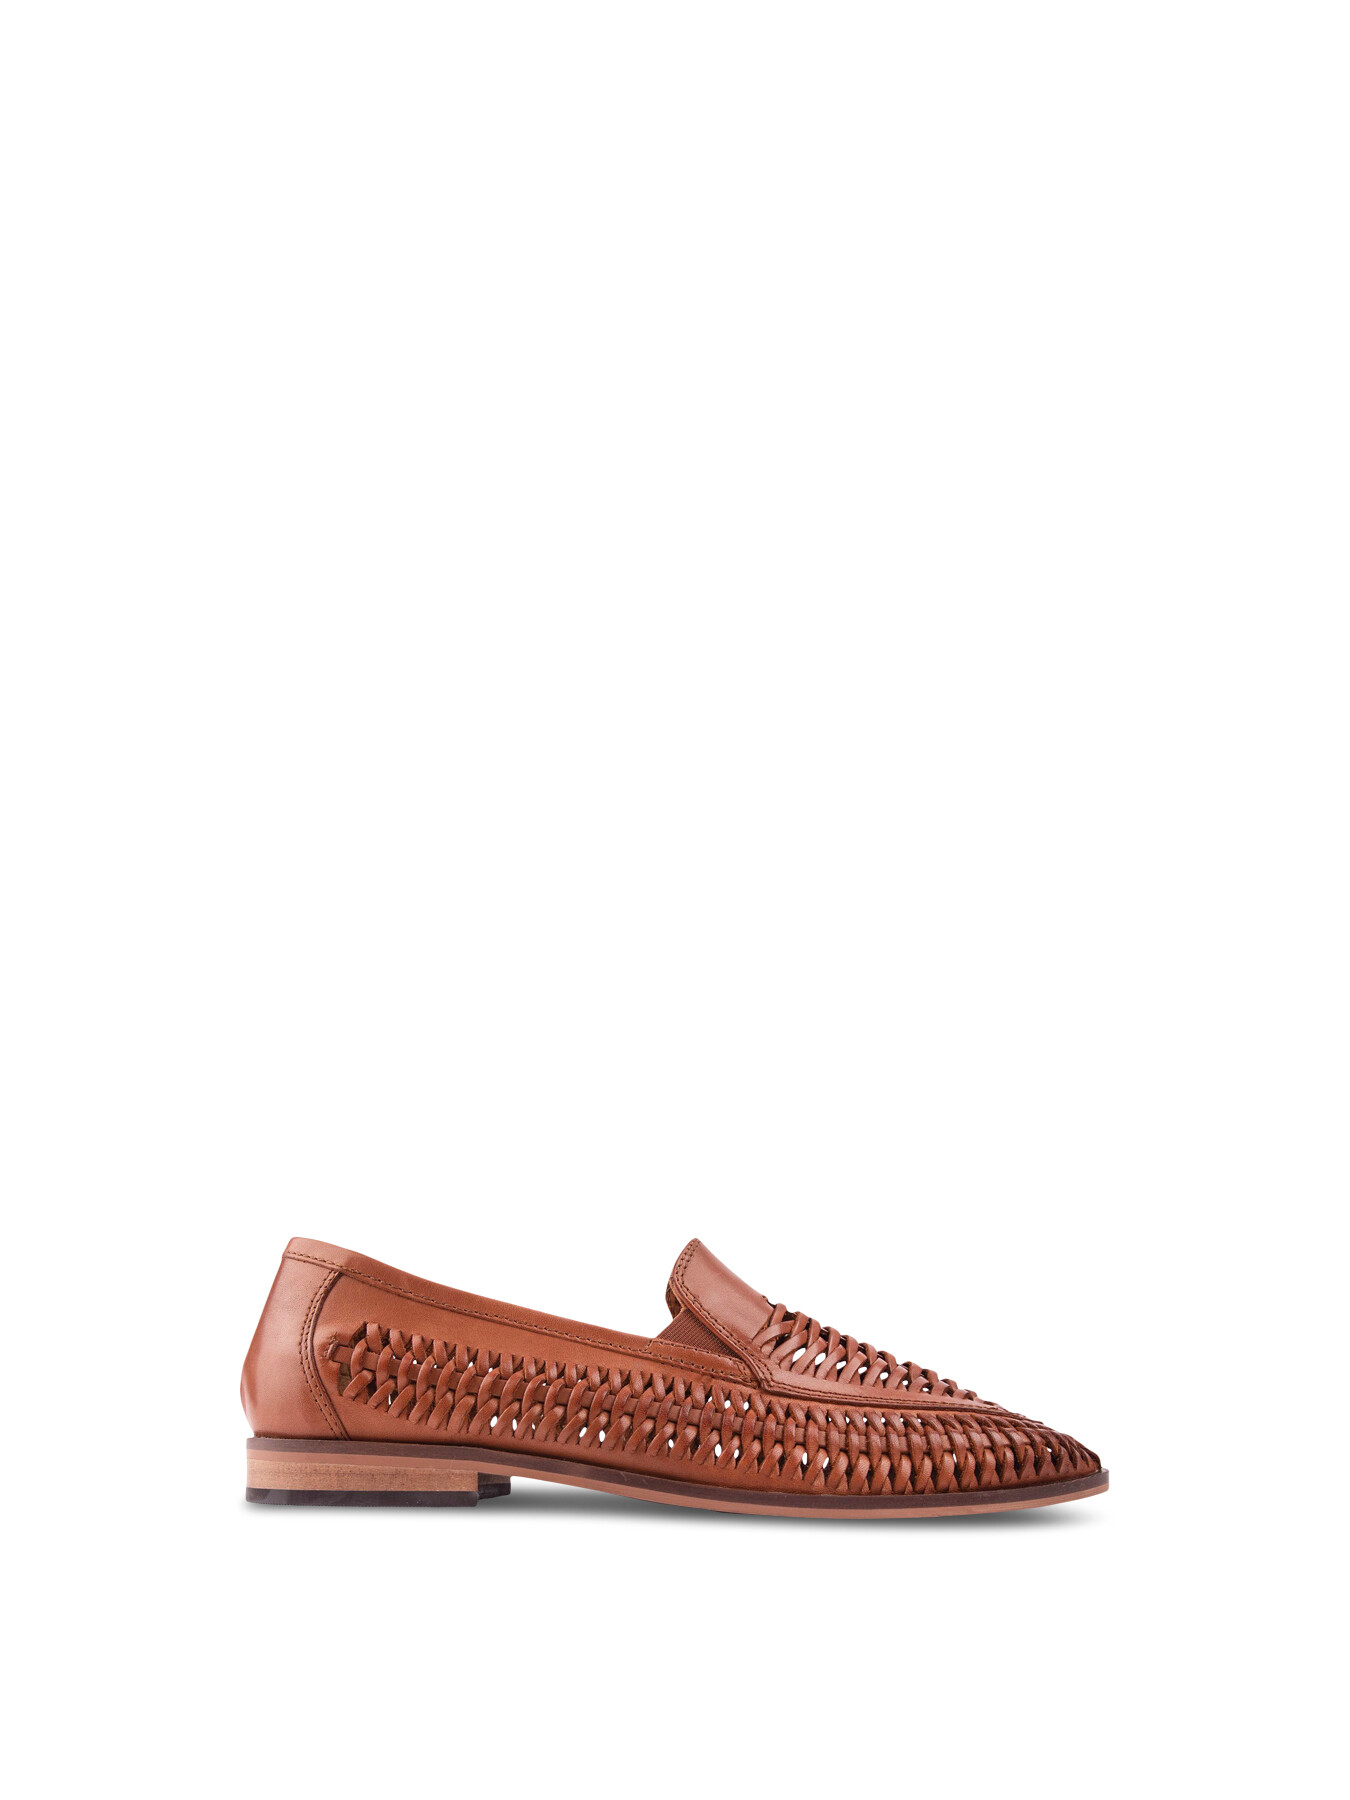 Sole Men's  Ophir Loafer Shoes